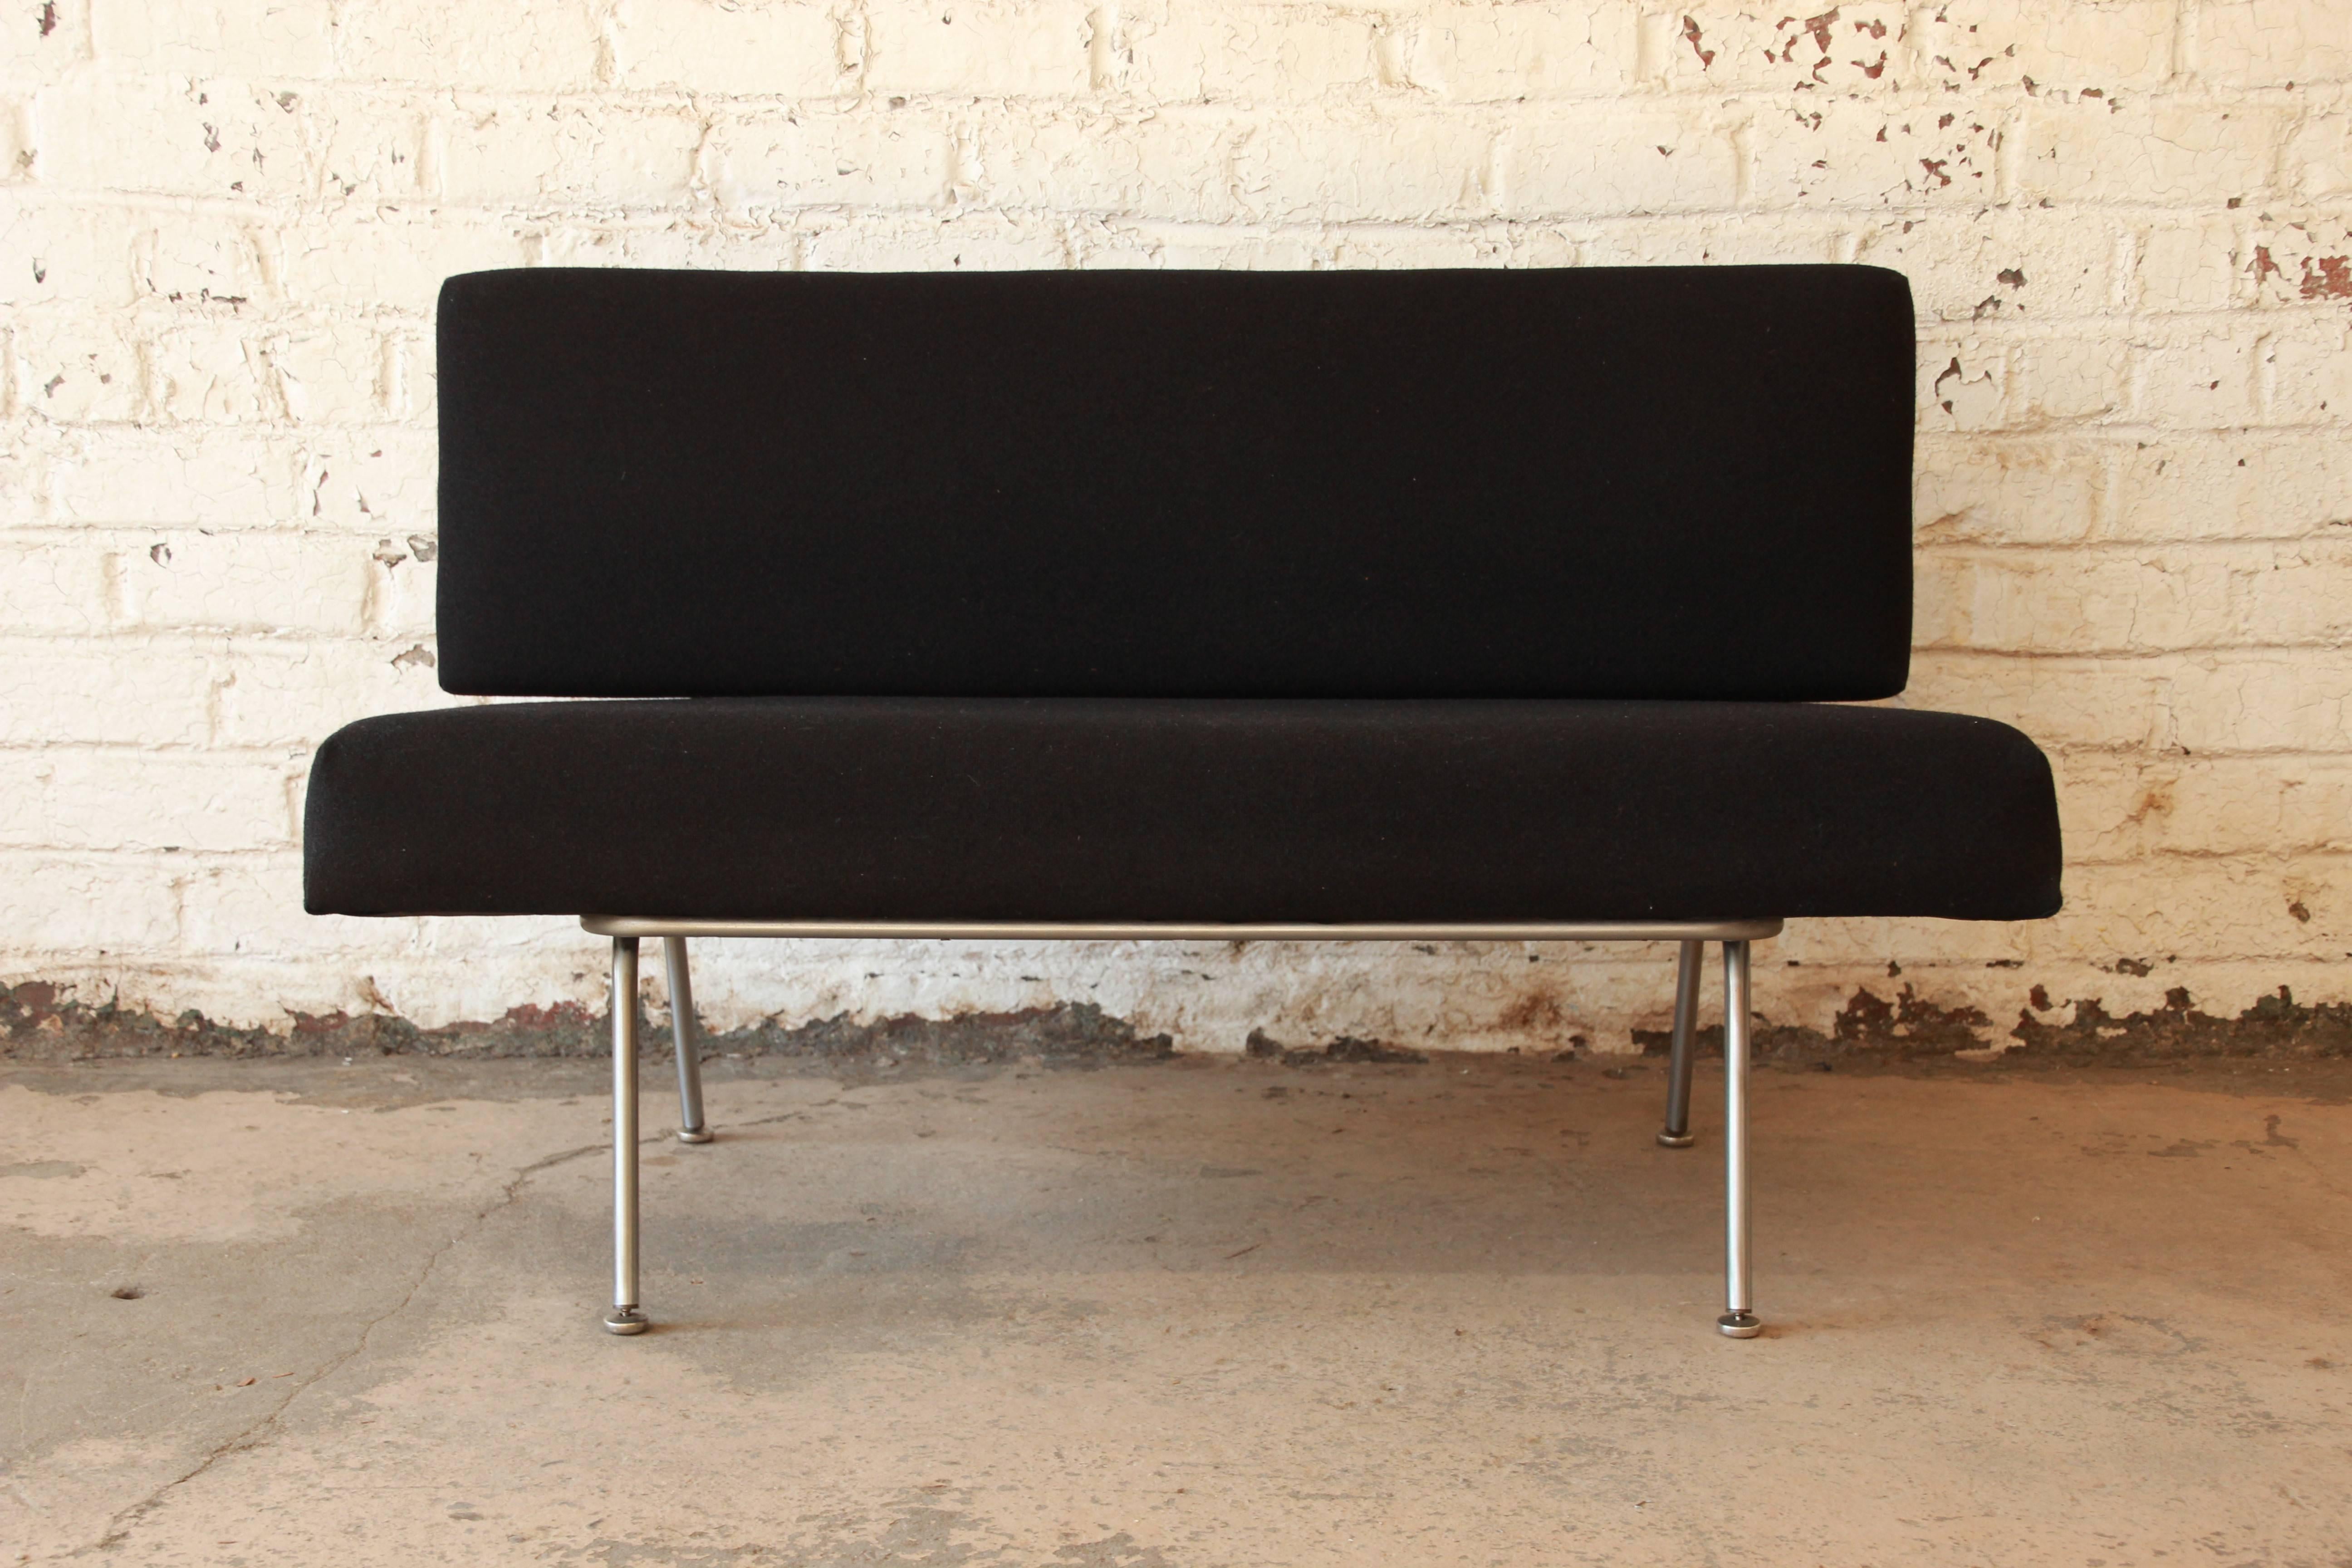 Original model 32 settee designed by Florence Knoll for Knoll Associates, circa 1950. This is a Classic piece of Mid-Century design. It has been newly reupholstered in black wool fabric. The aluminum frame is in great condition. Overall, the settee